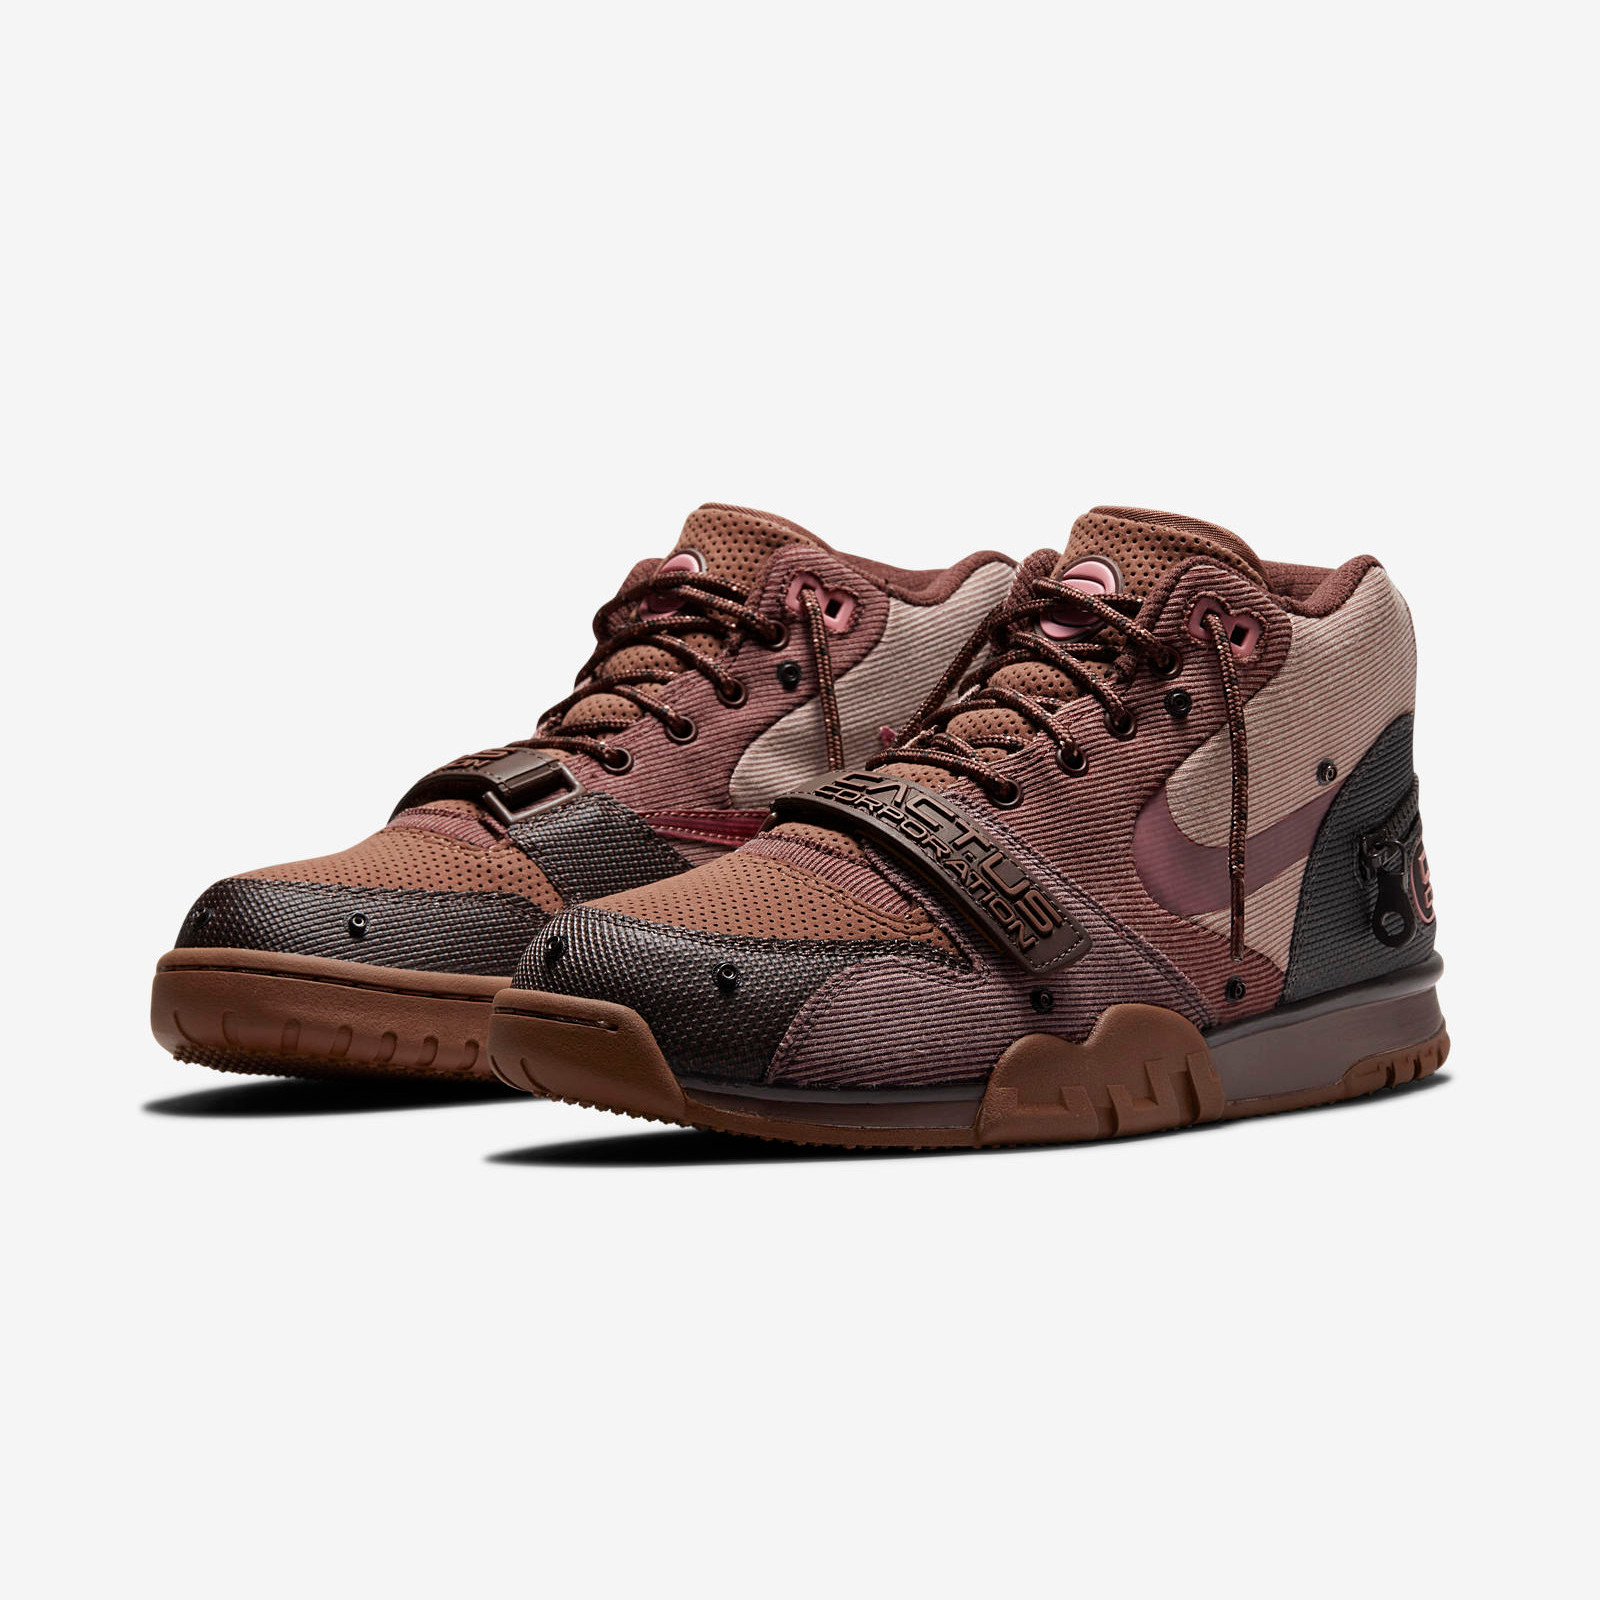 Nike x CACT.US CORP
Air Trainer 1
« Archaeo Brown »